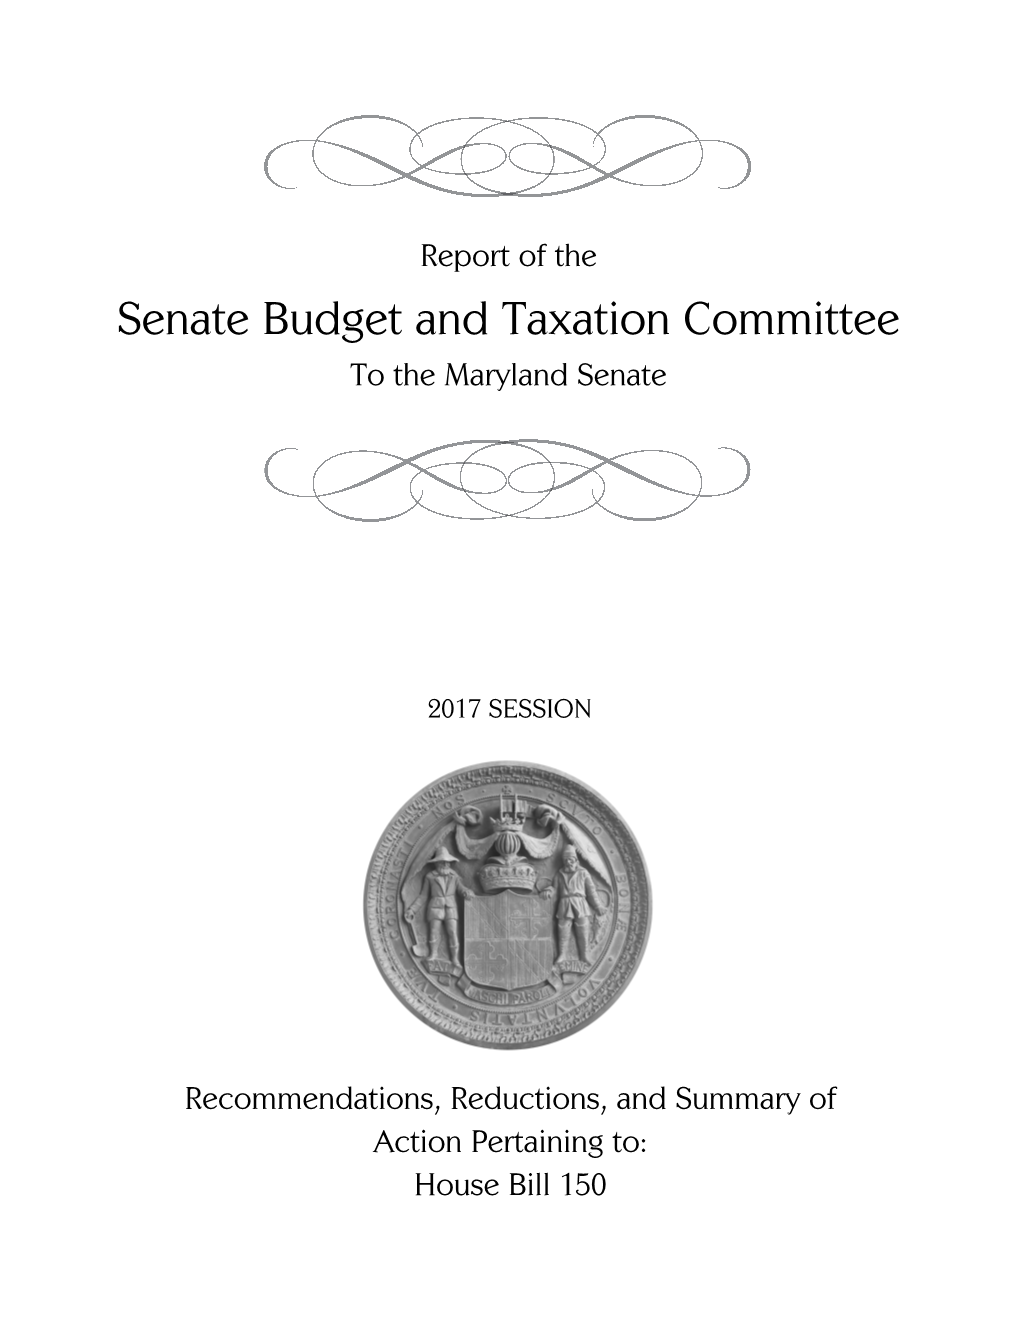 Report of the Senate Budget and Taxation Committee to the Maryland Senate